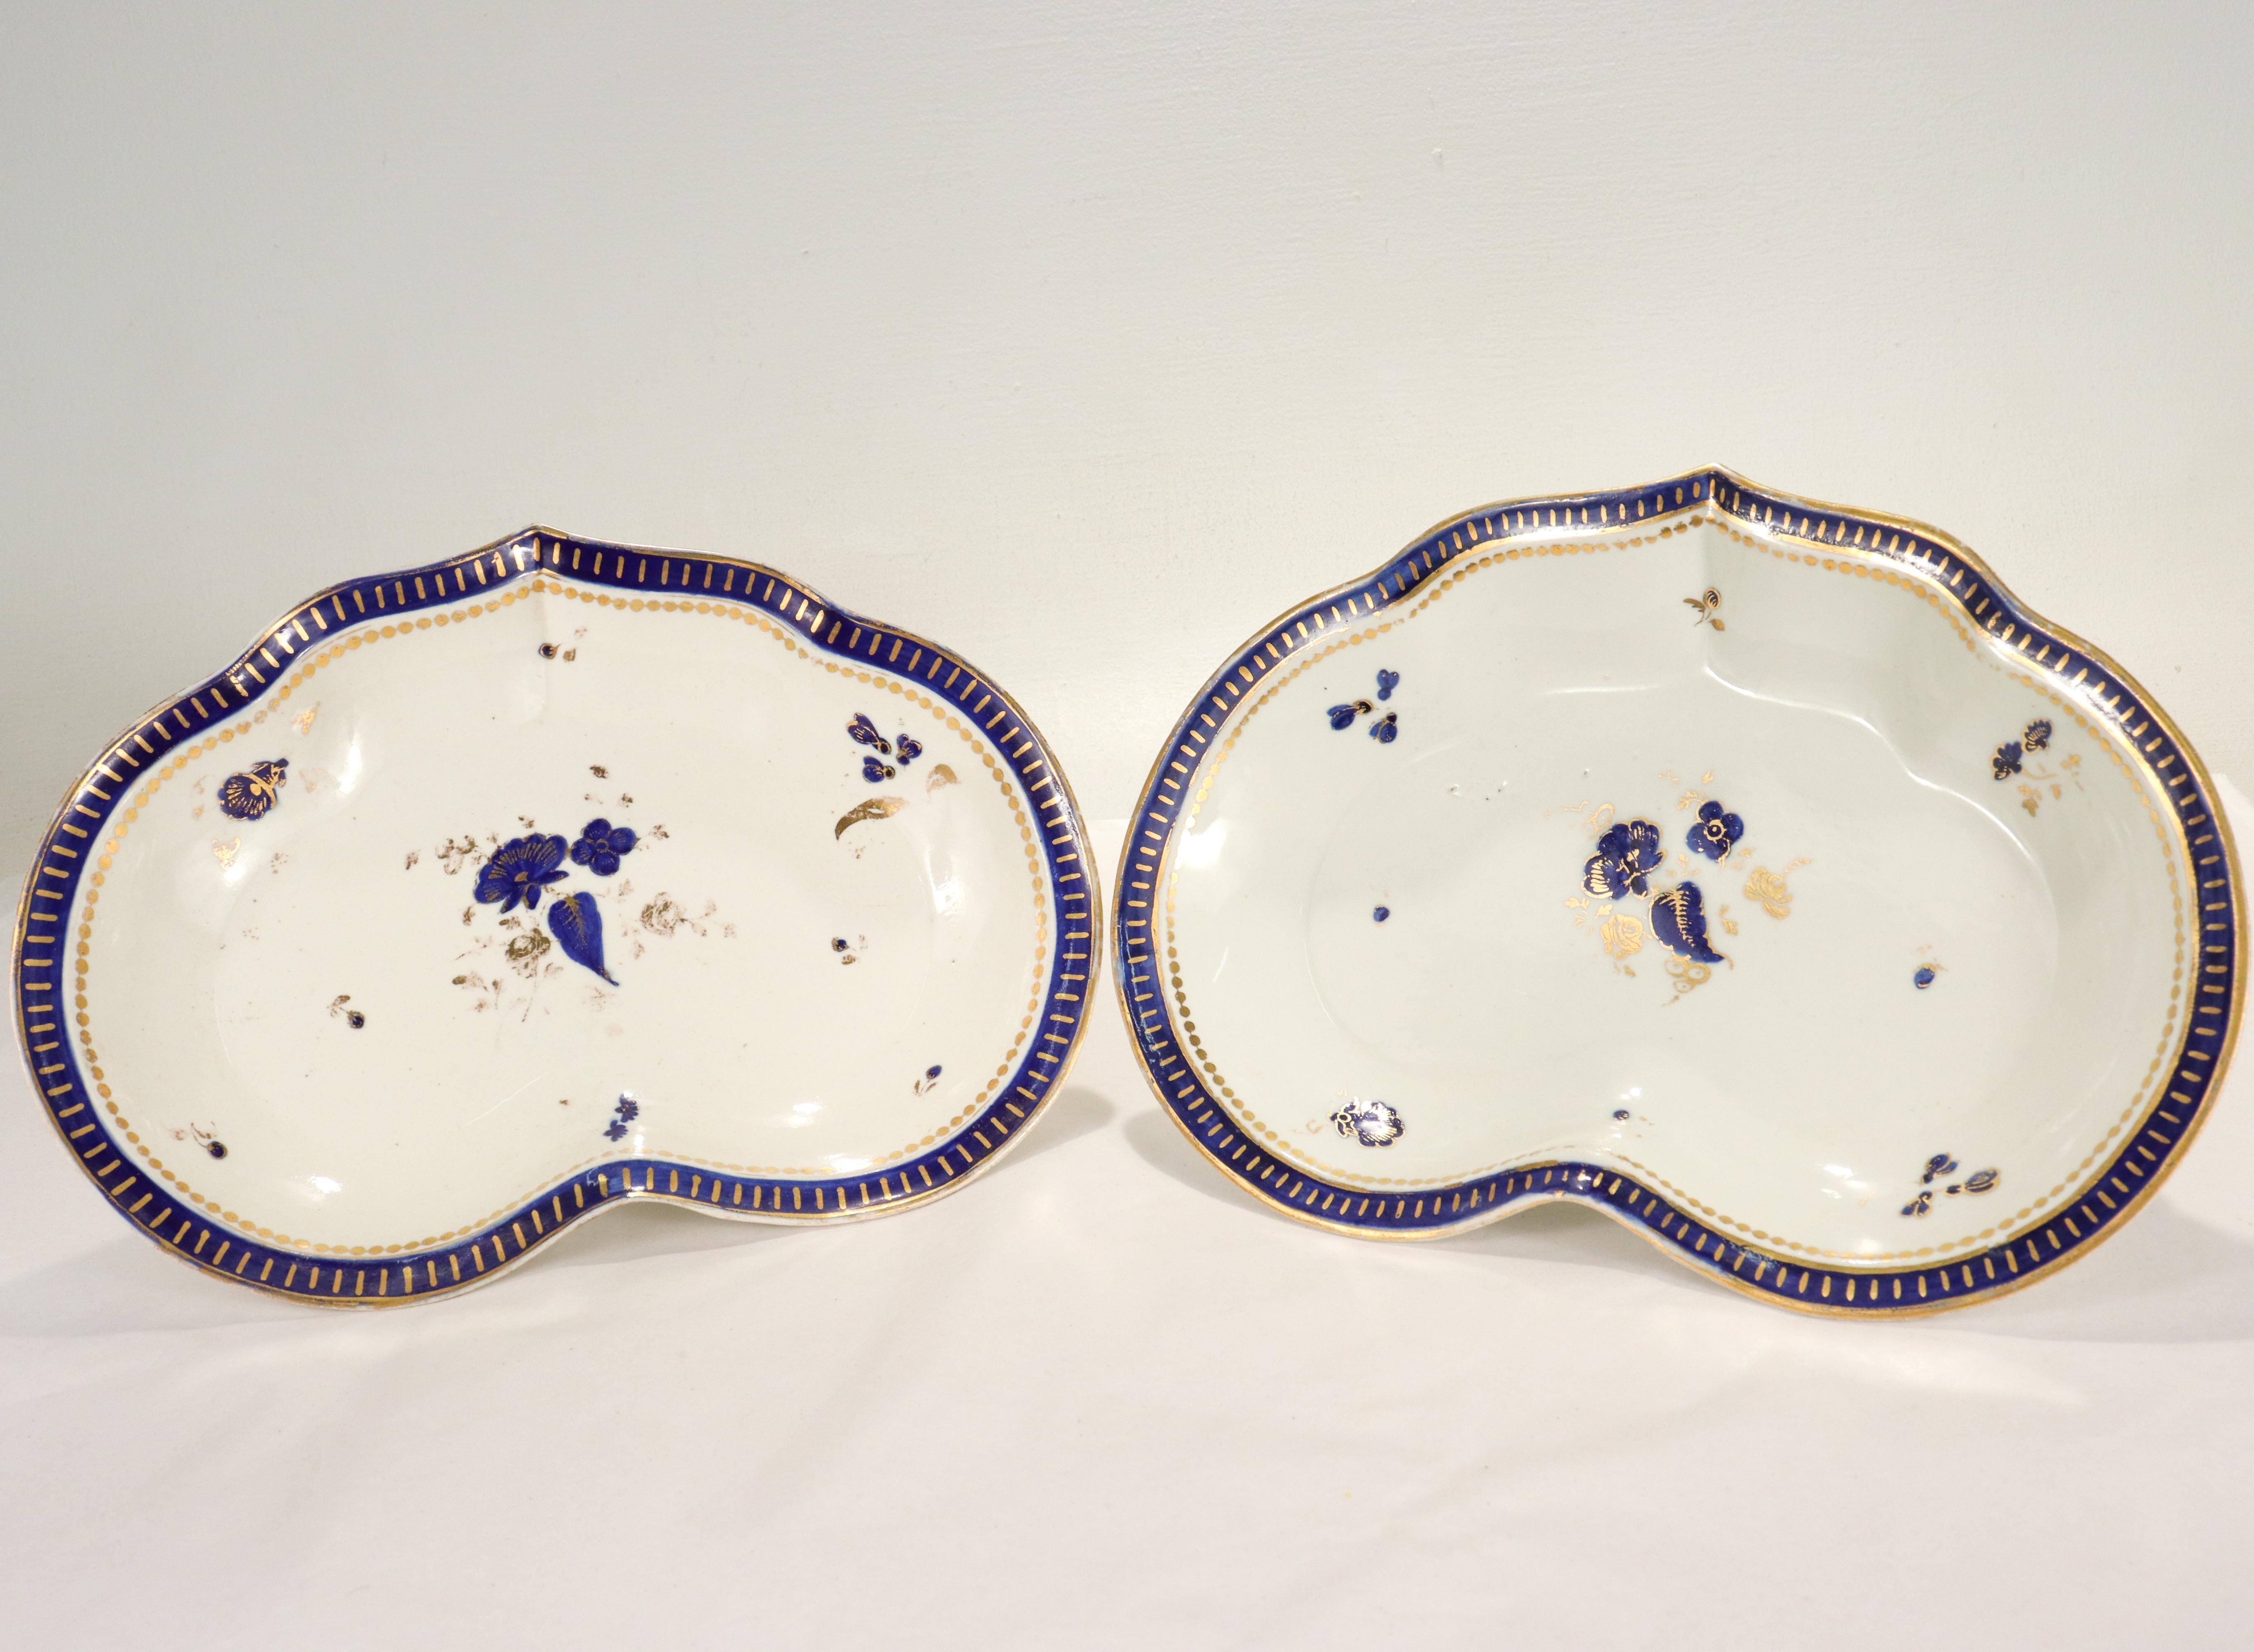 A fine pair of English porcelain shaped bowls or dishes.

By Caughley.

In a heart-form or shield shape.

Decorated throughout with painted cobalt blue and gilt floral devices. The rim is decorated with geometric devices in the same